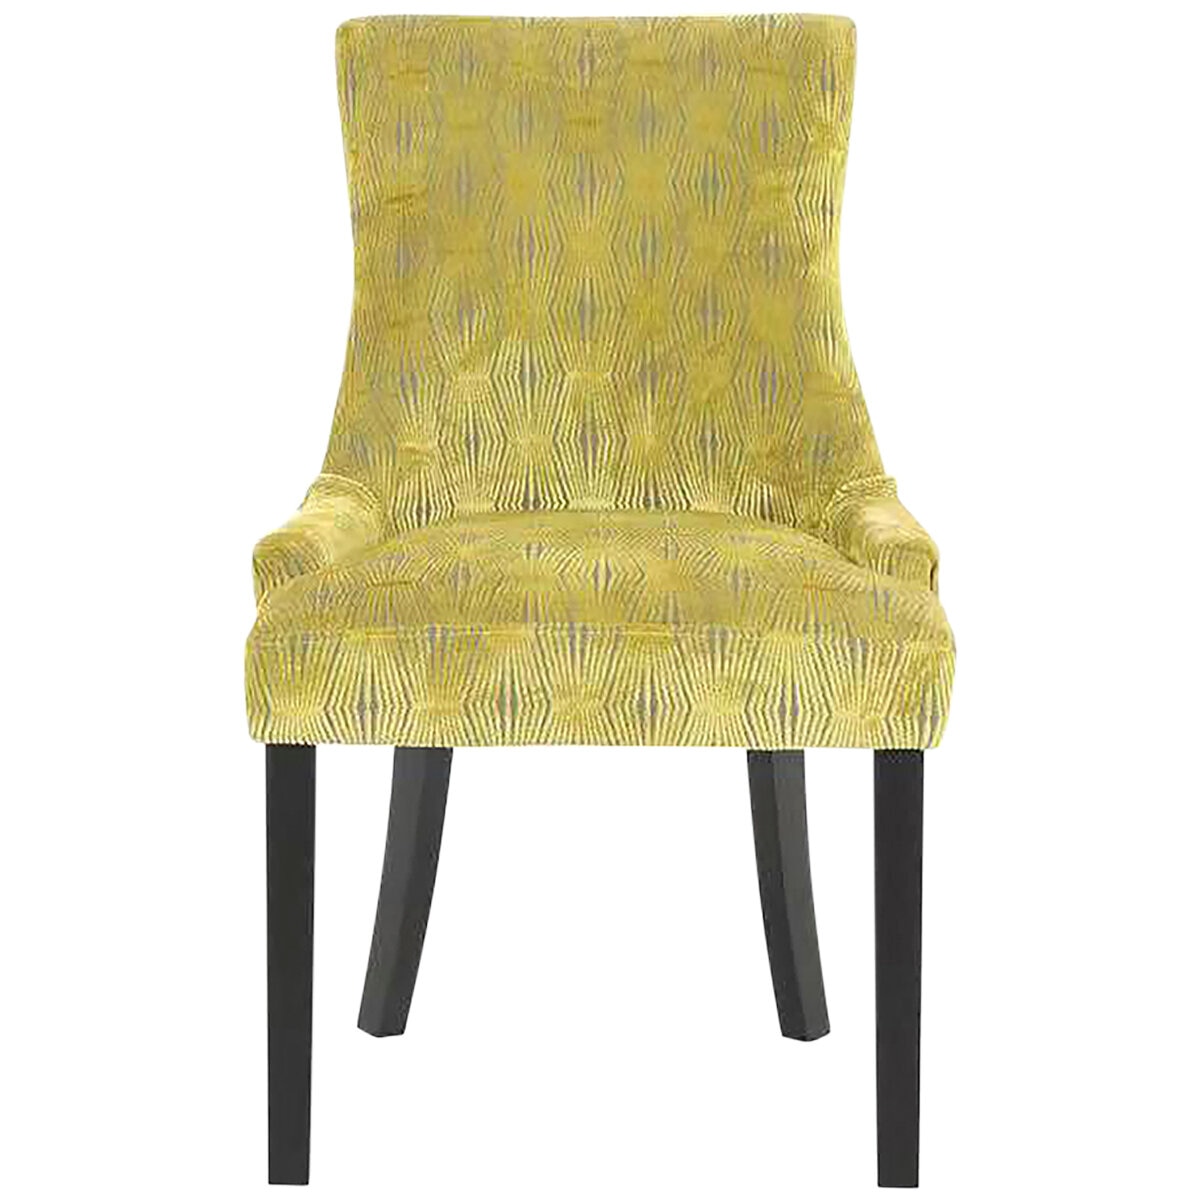 Moran Florence Fabric Chair 2 pack Yellow Zest